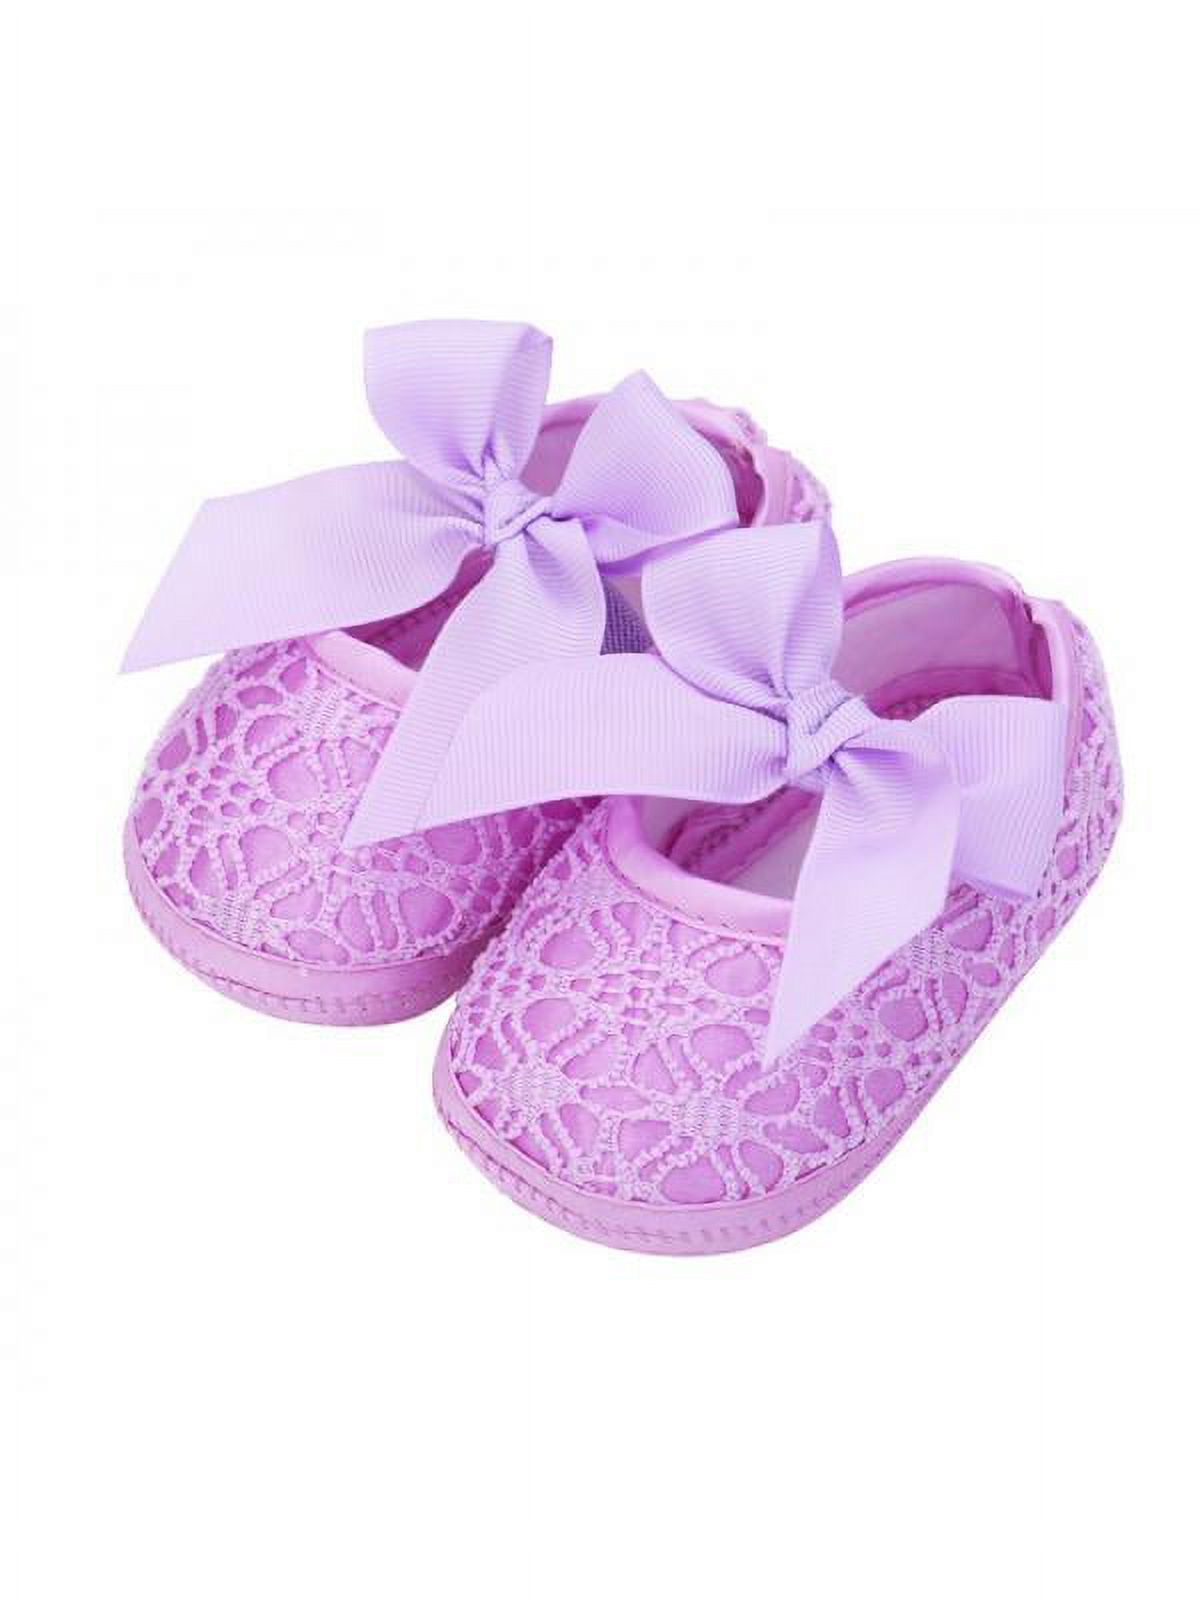 Baby Girl Princess Shoes Lace Mesh Sneakers Toddler Soft Soled First Walker - image 1 of 2